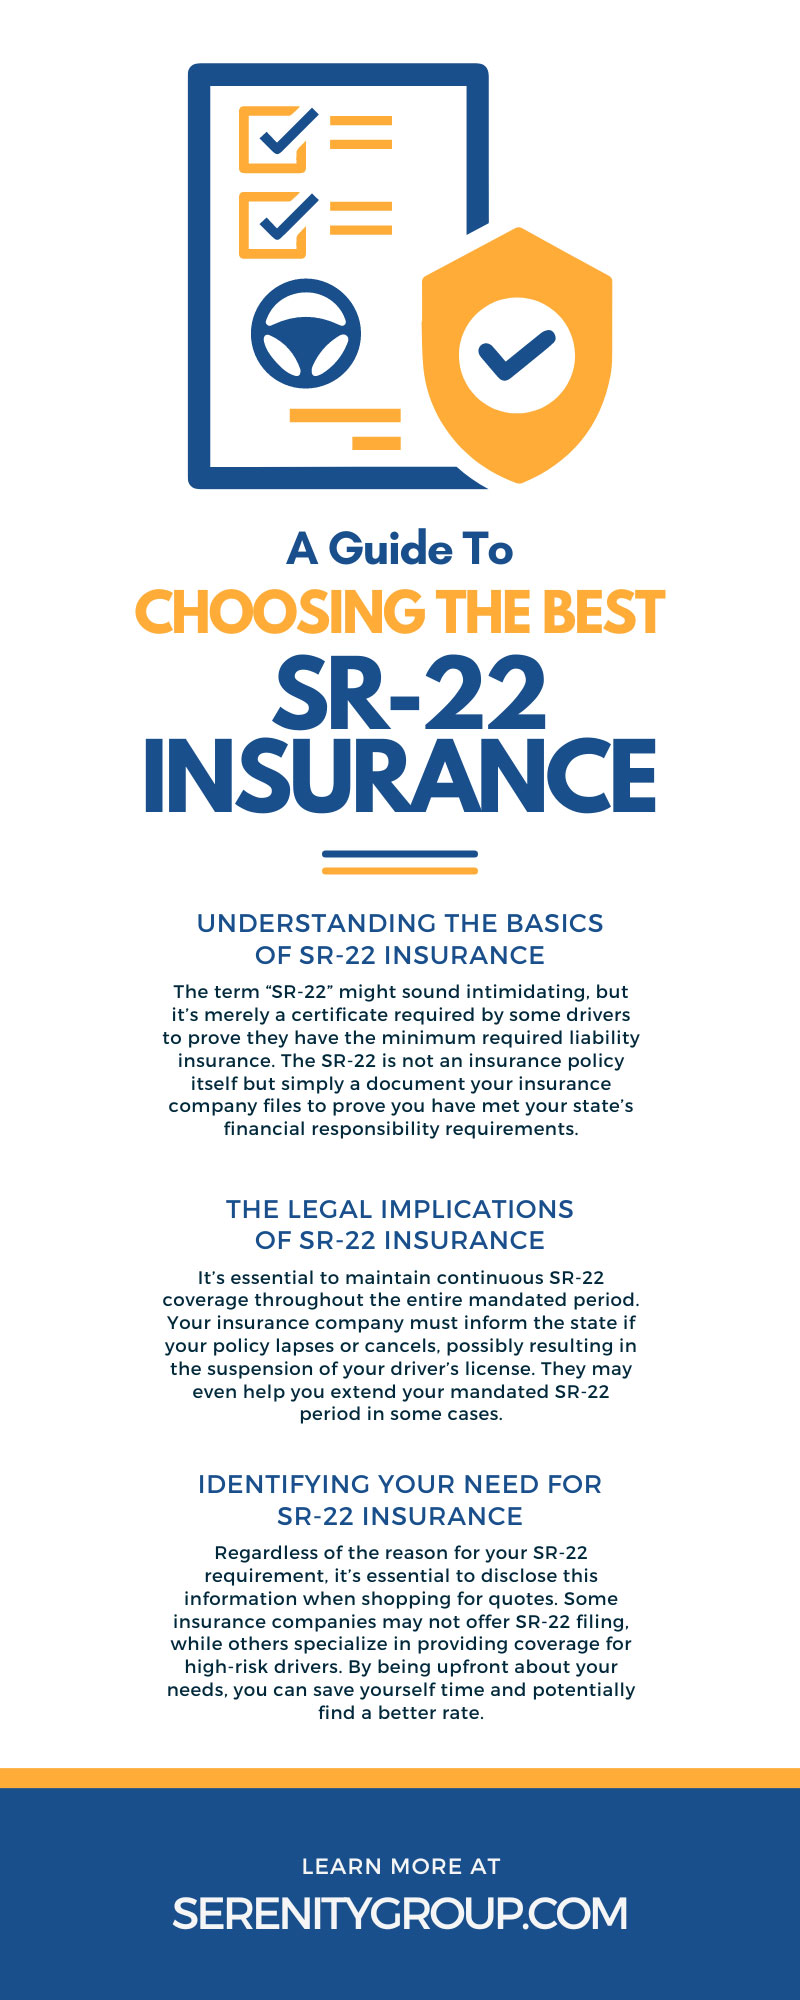 A Guide To Choosing the Best SR-22 Insurance
